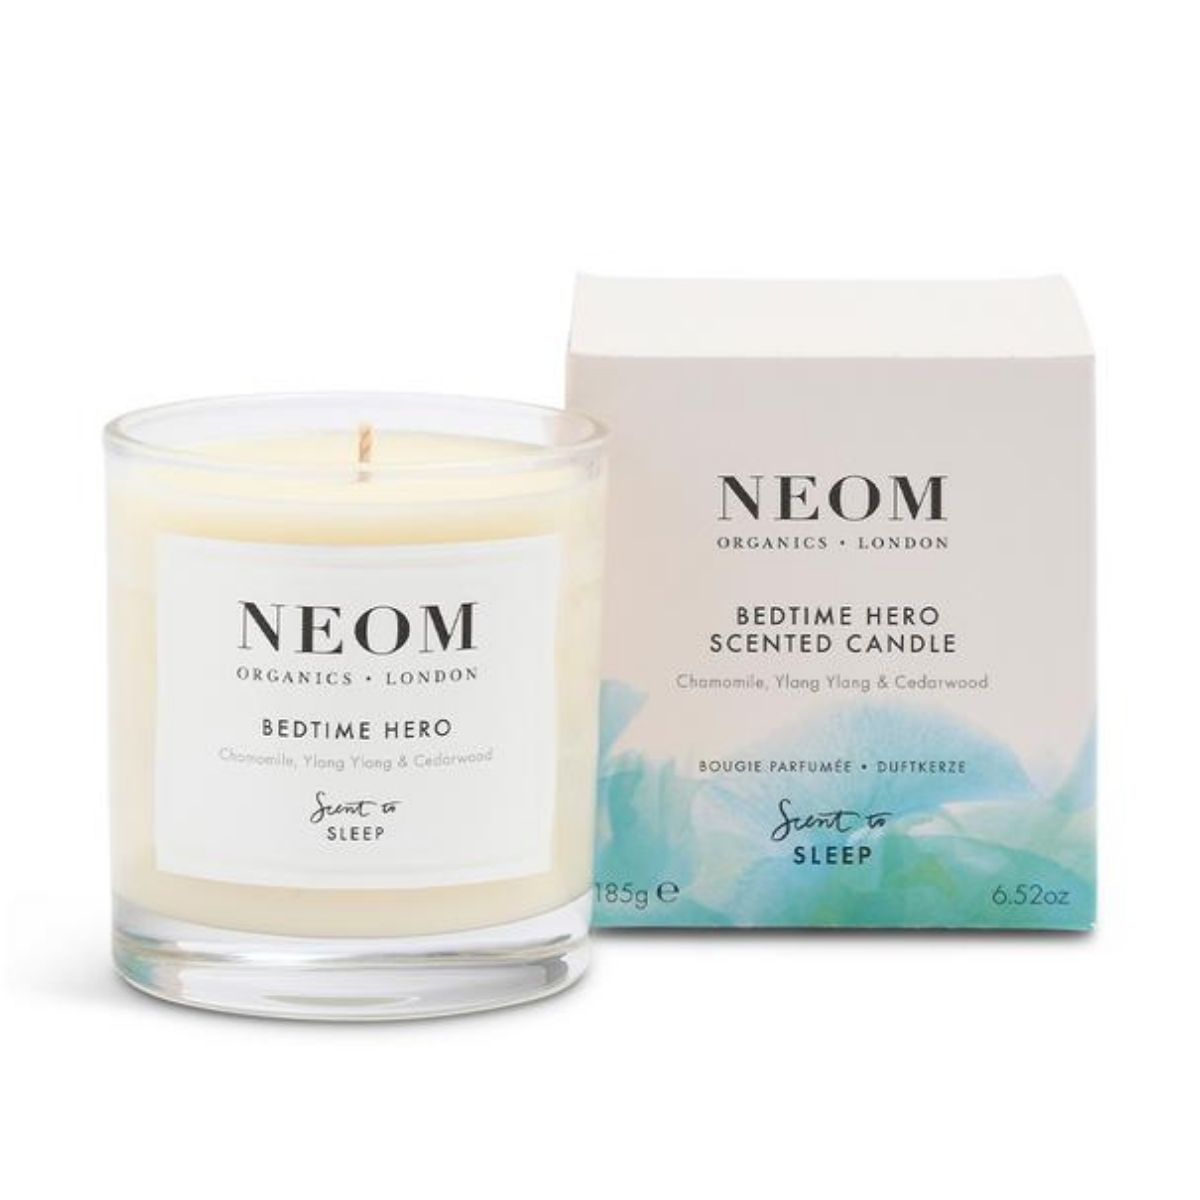 Neom Scent to Sleep Bedtime Hero Scented Candle 1 Wick.